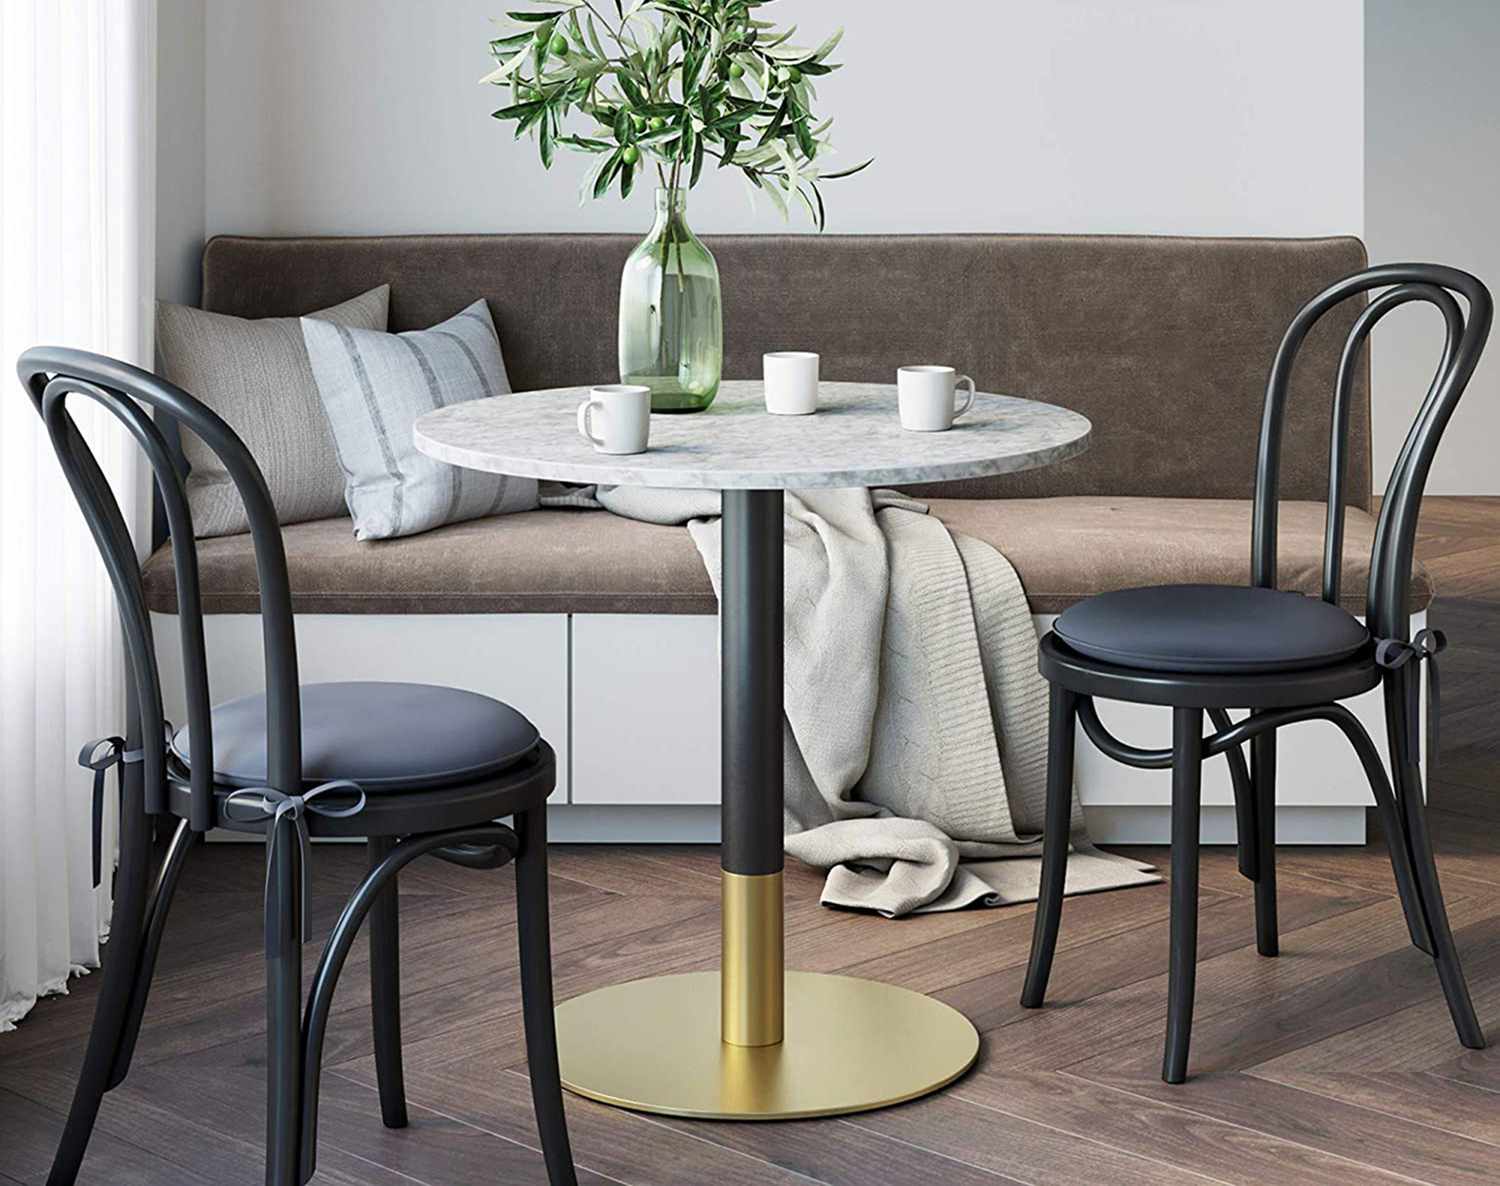 8 Best Dining Tables For Small Spaces, Small Round Cafe Style Table